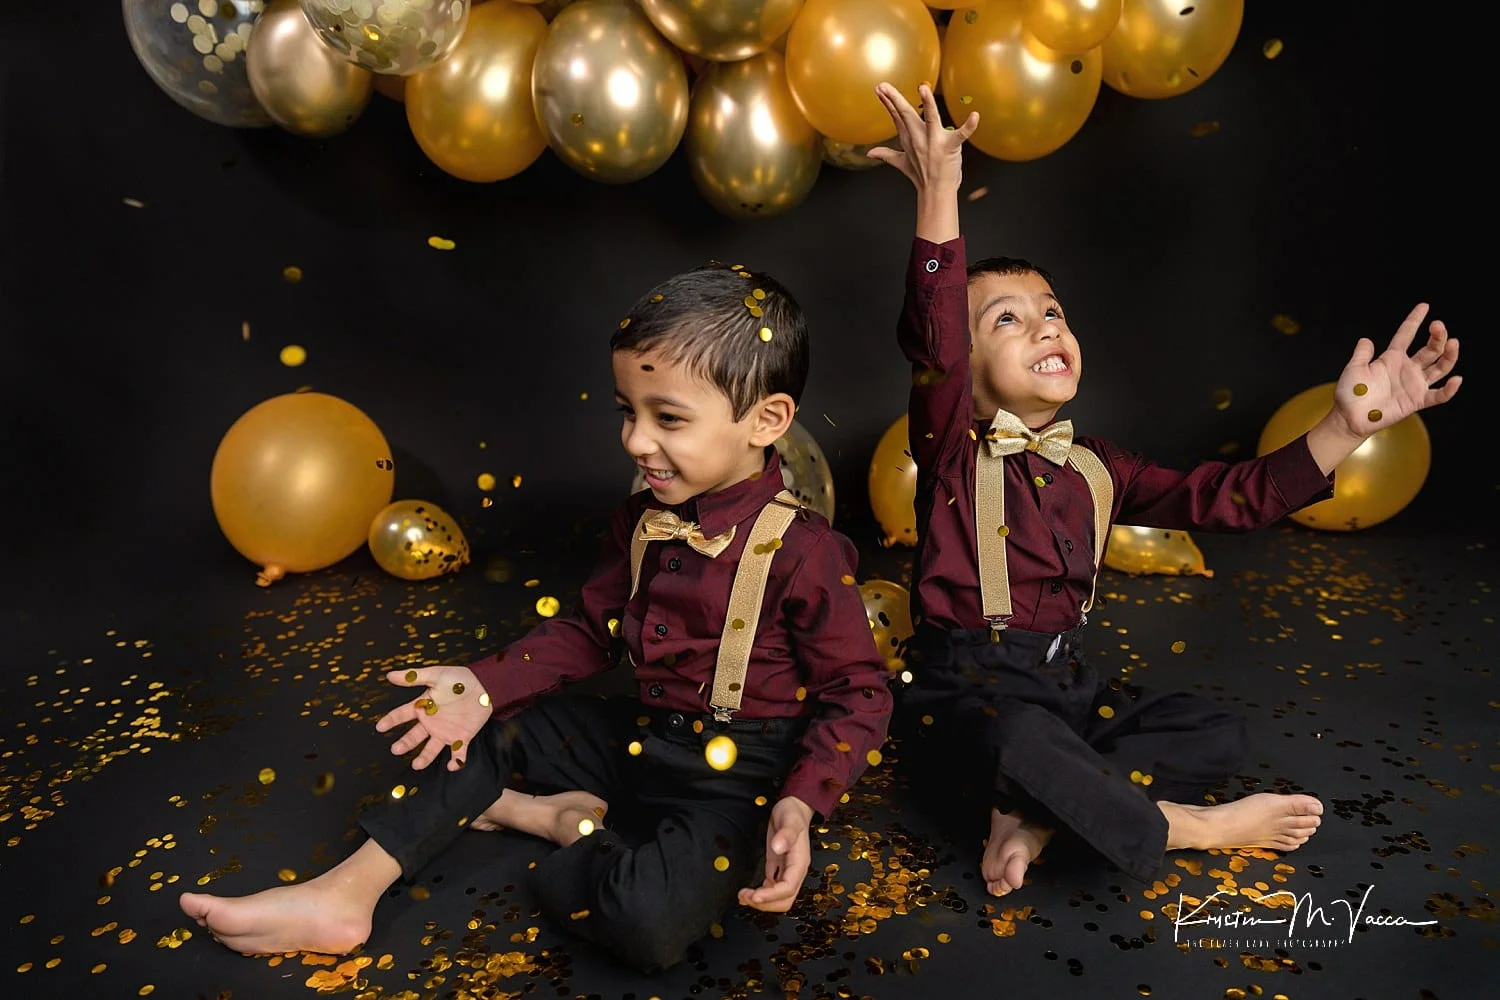 Niholia Ricky Zoom Background For Boys Birthday Party Photography